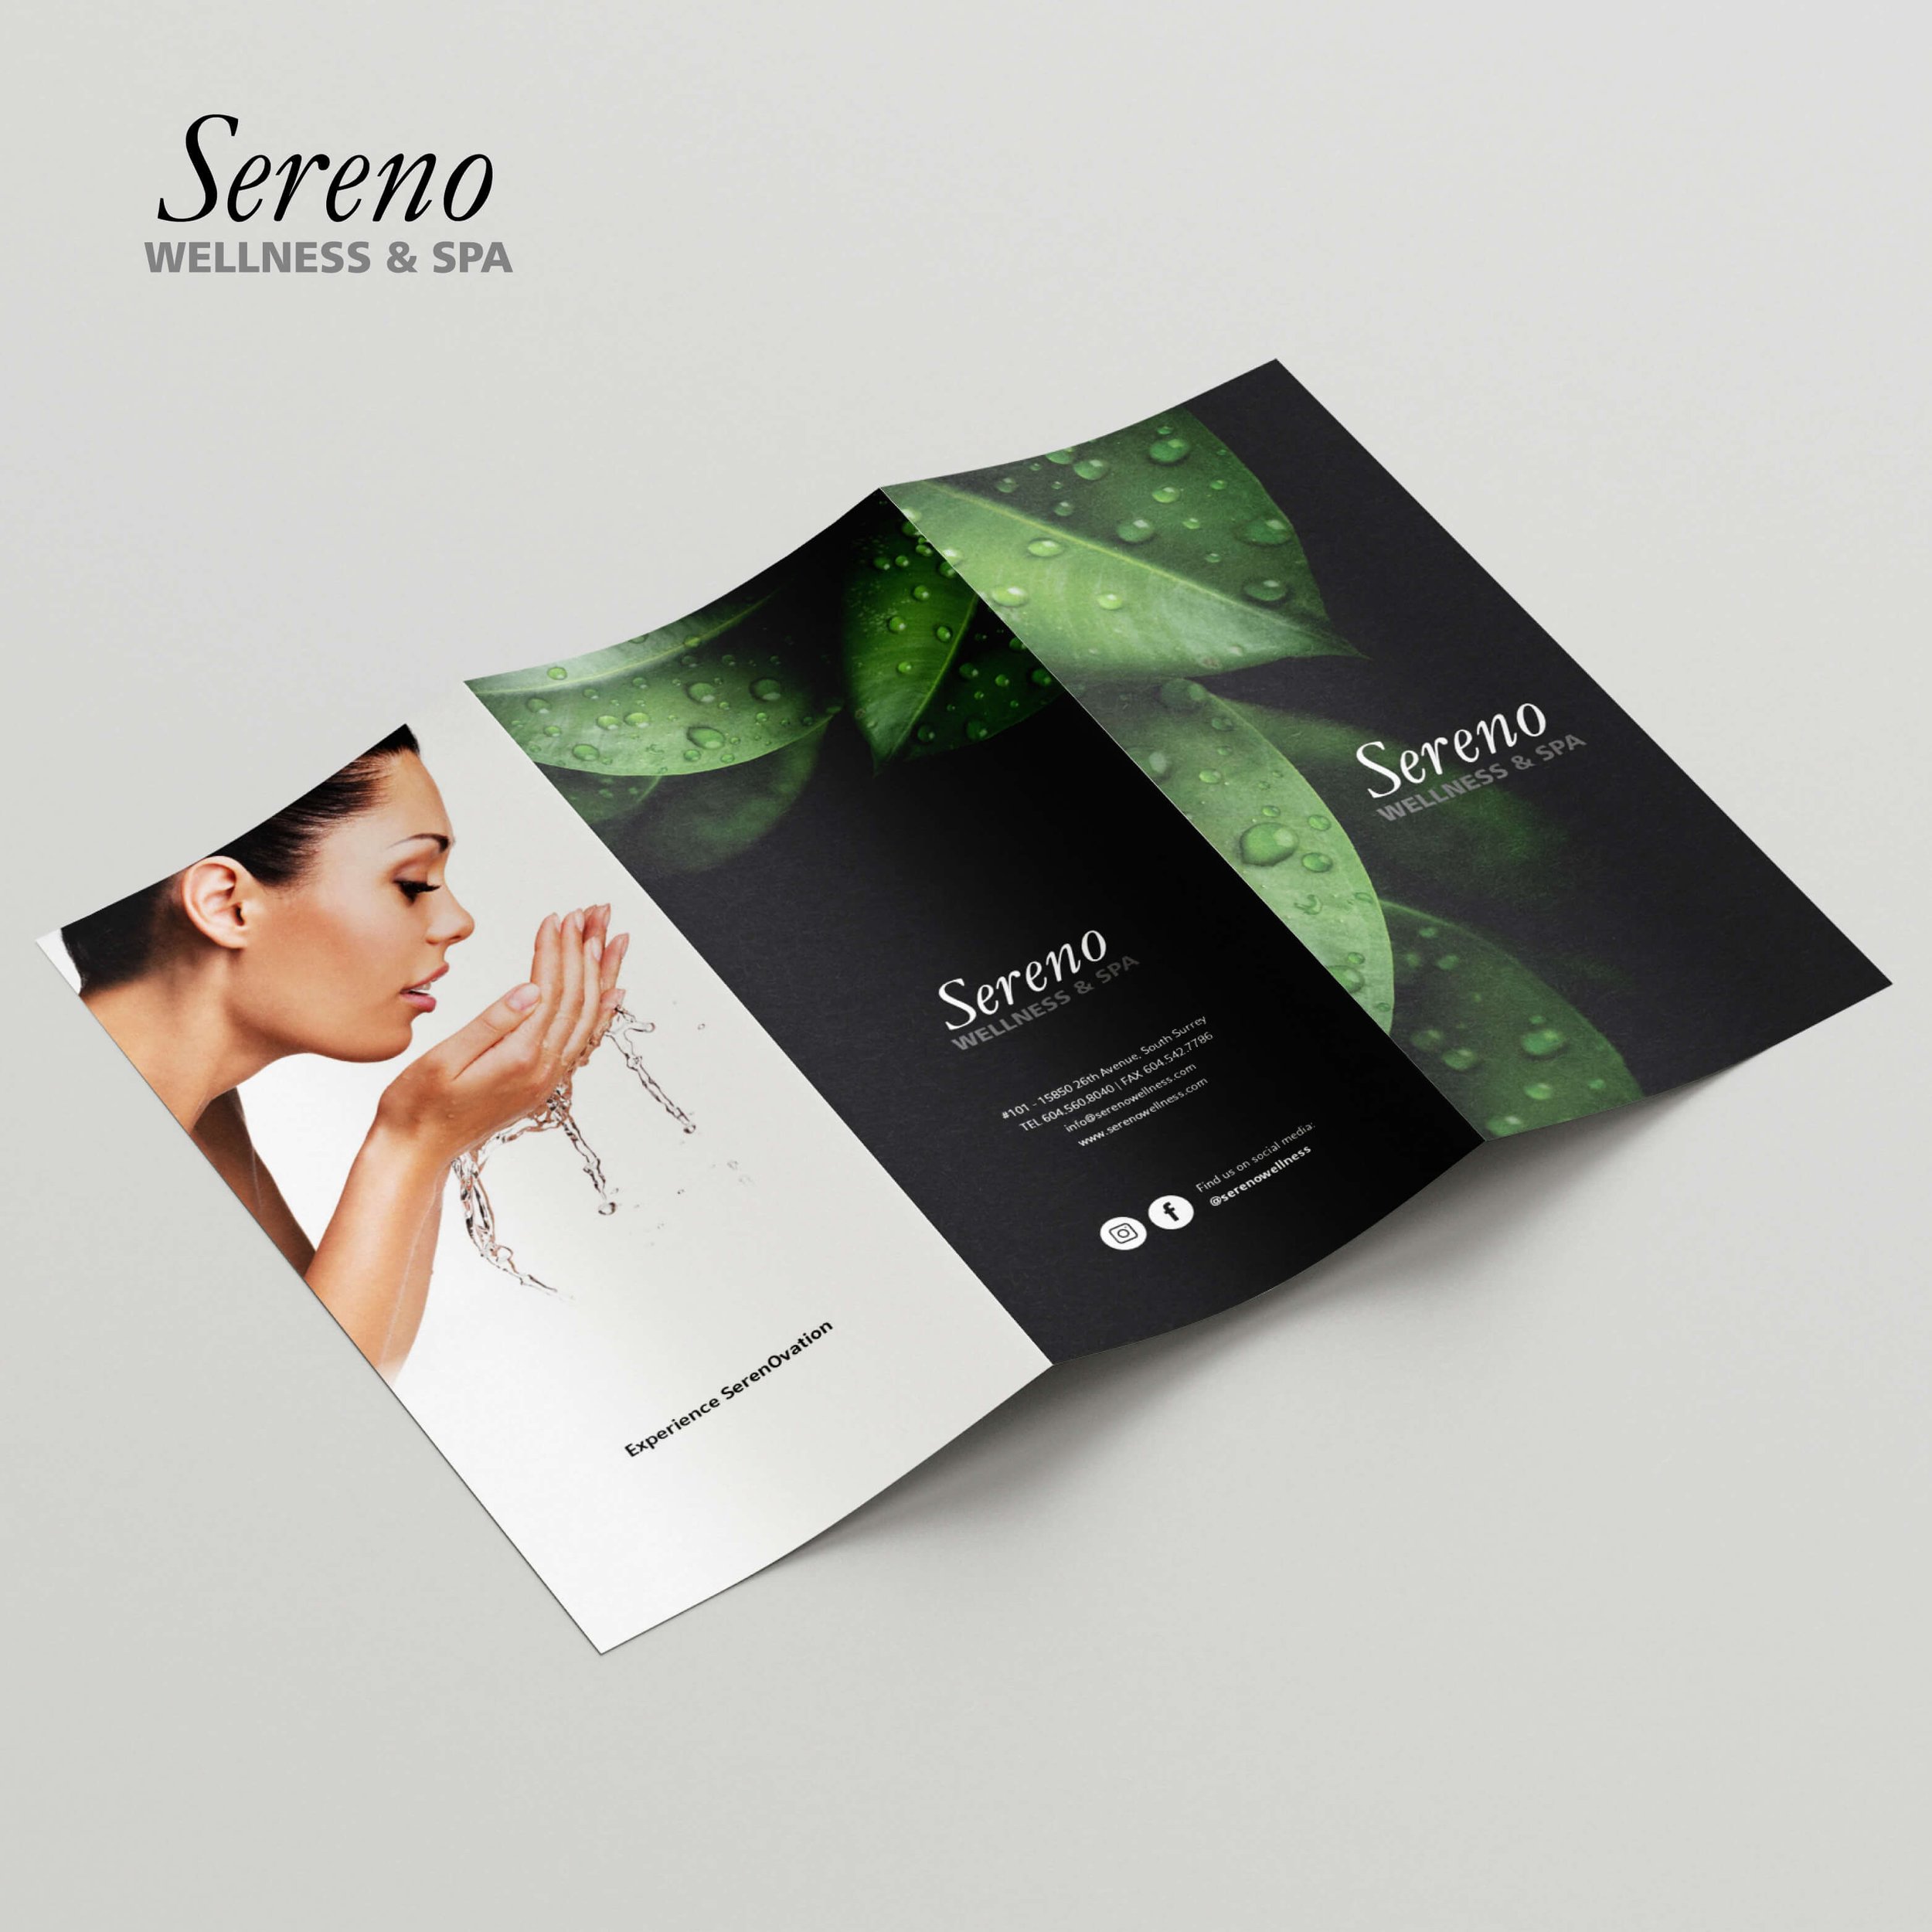 Printed tri-fold brochure design for a Canadian health and wellness medical spa, marketing material, freelance graphic design by Charmaine Muzyka, Calgary Alberta (Copy)